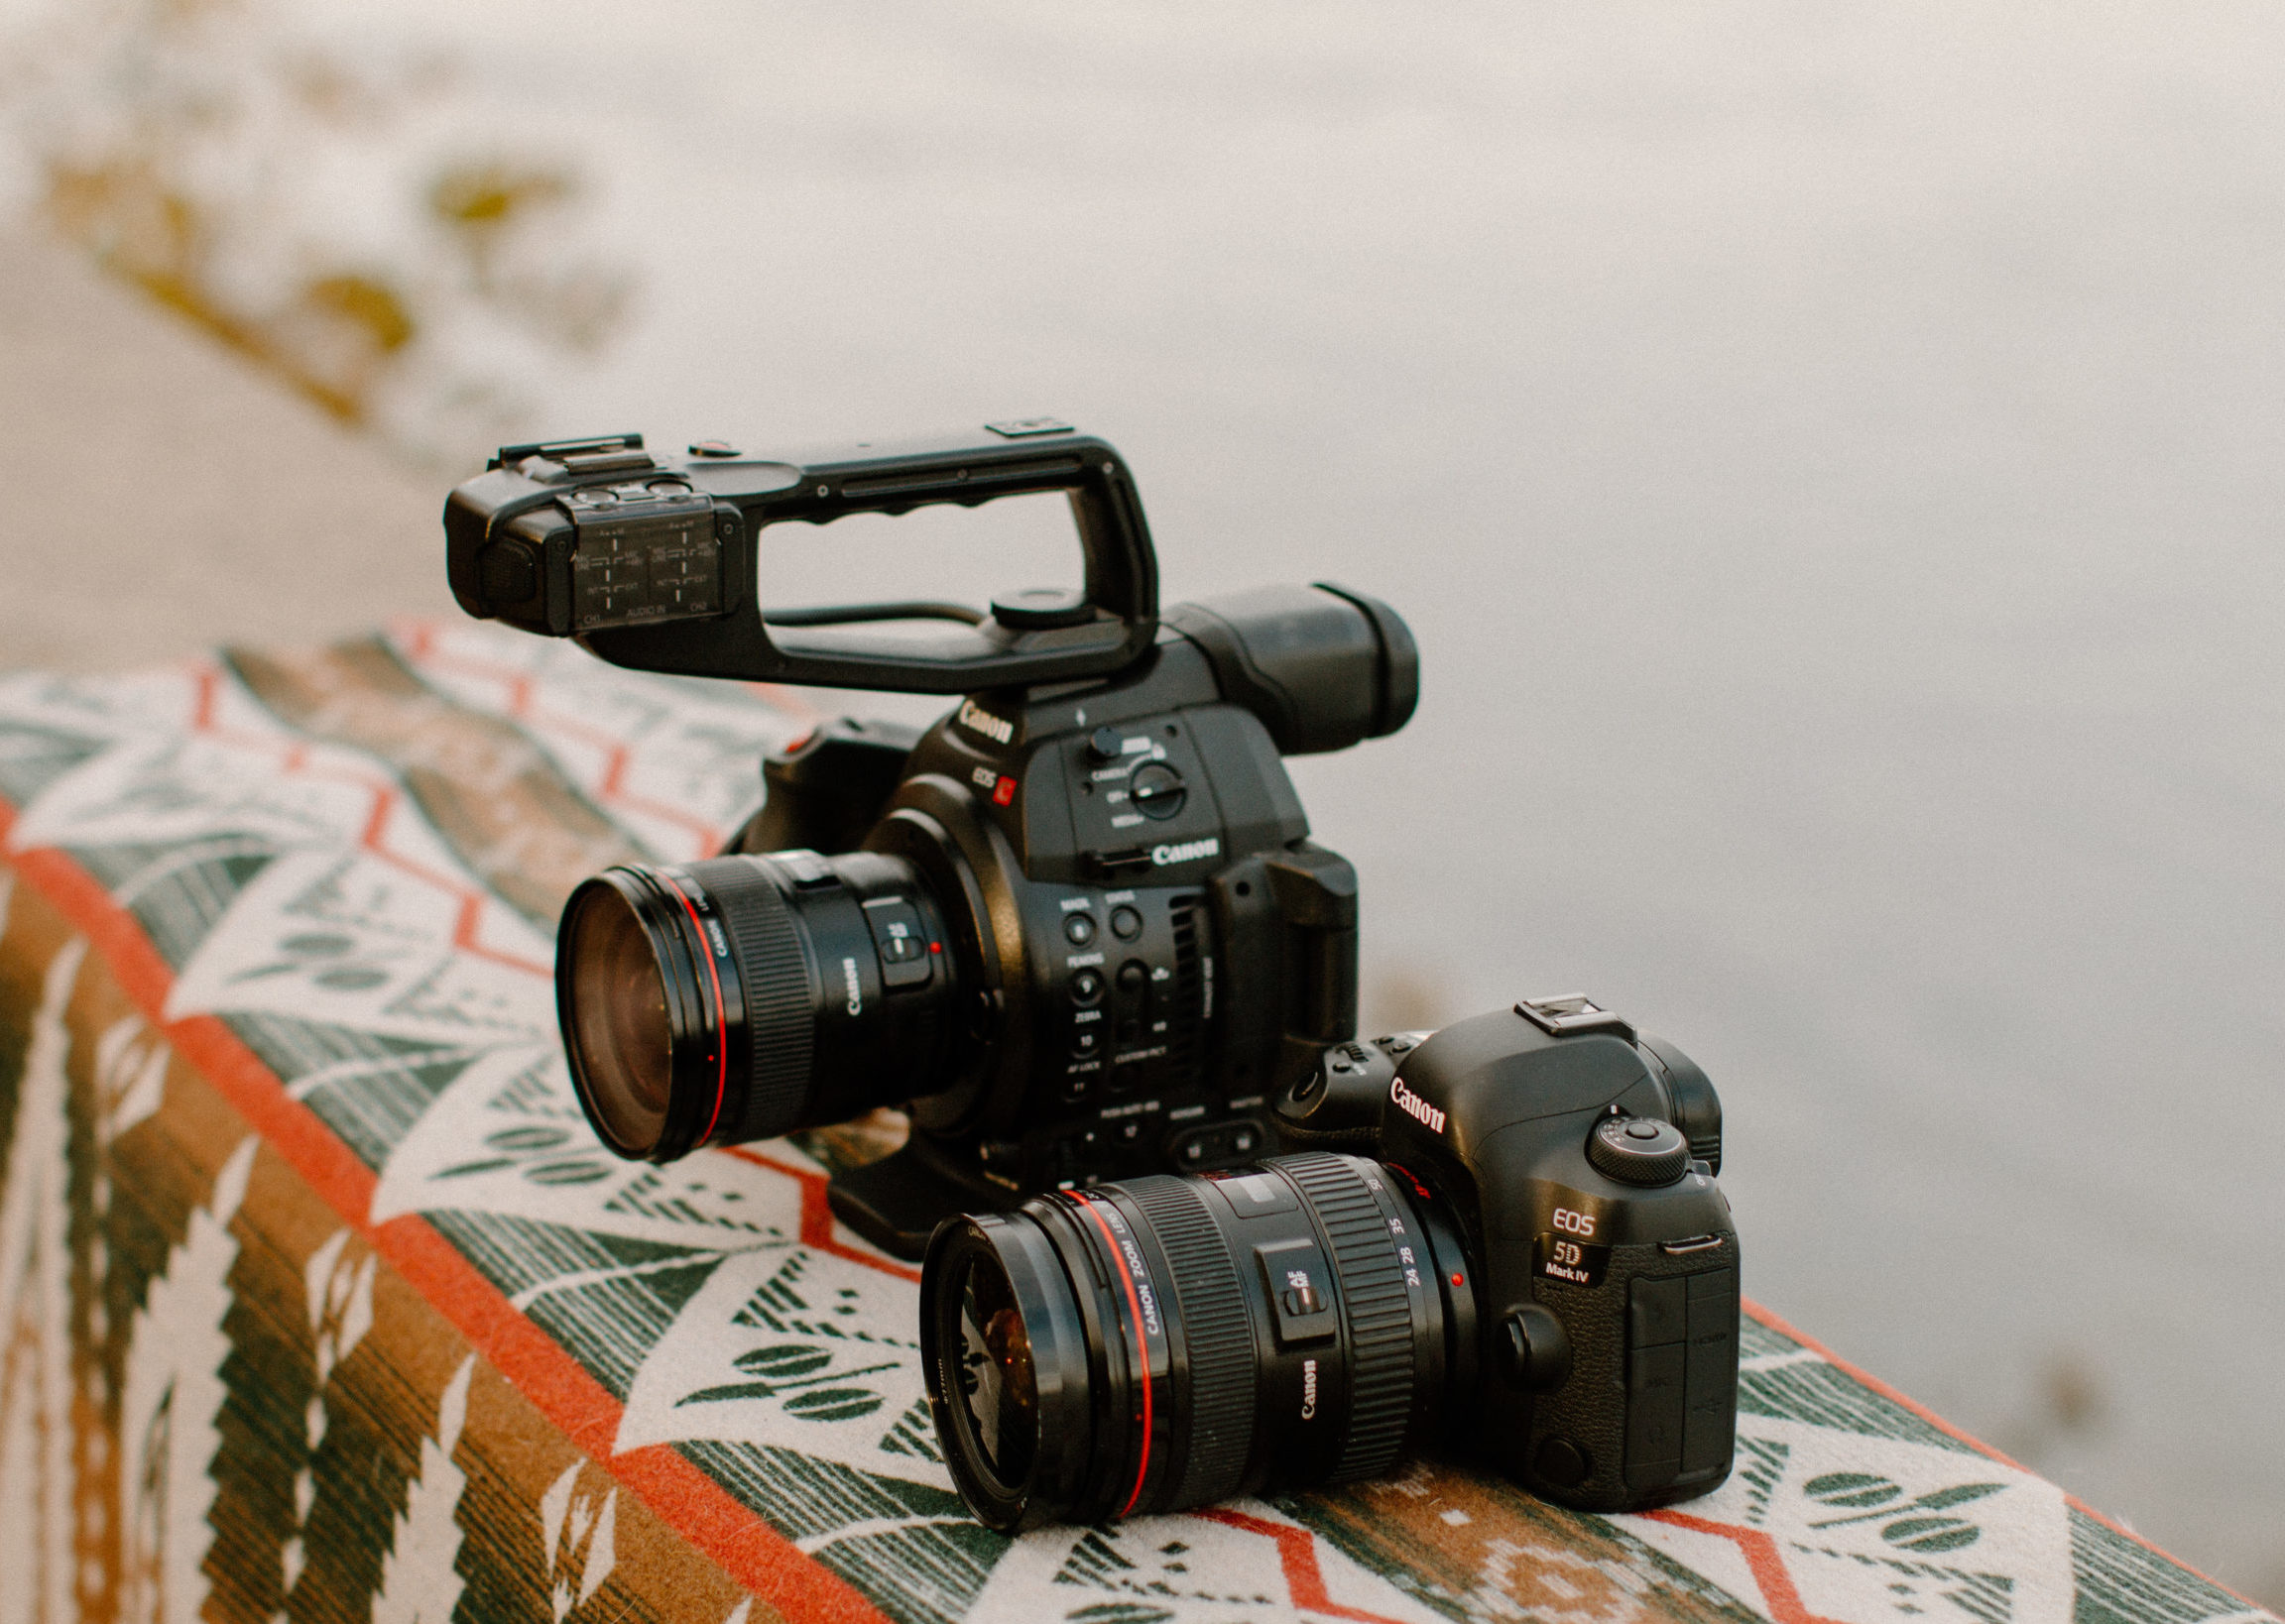 5 Tips for Creating Video Content On a Budget